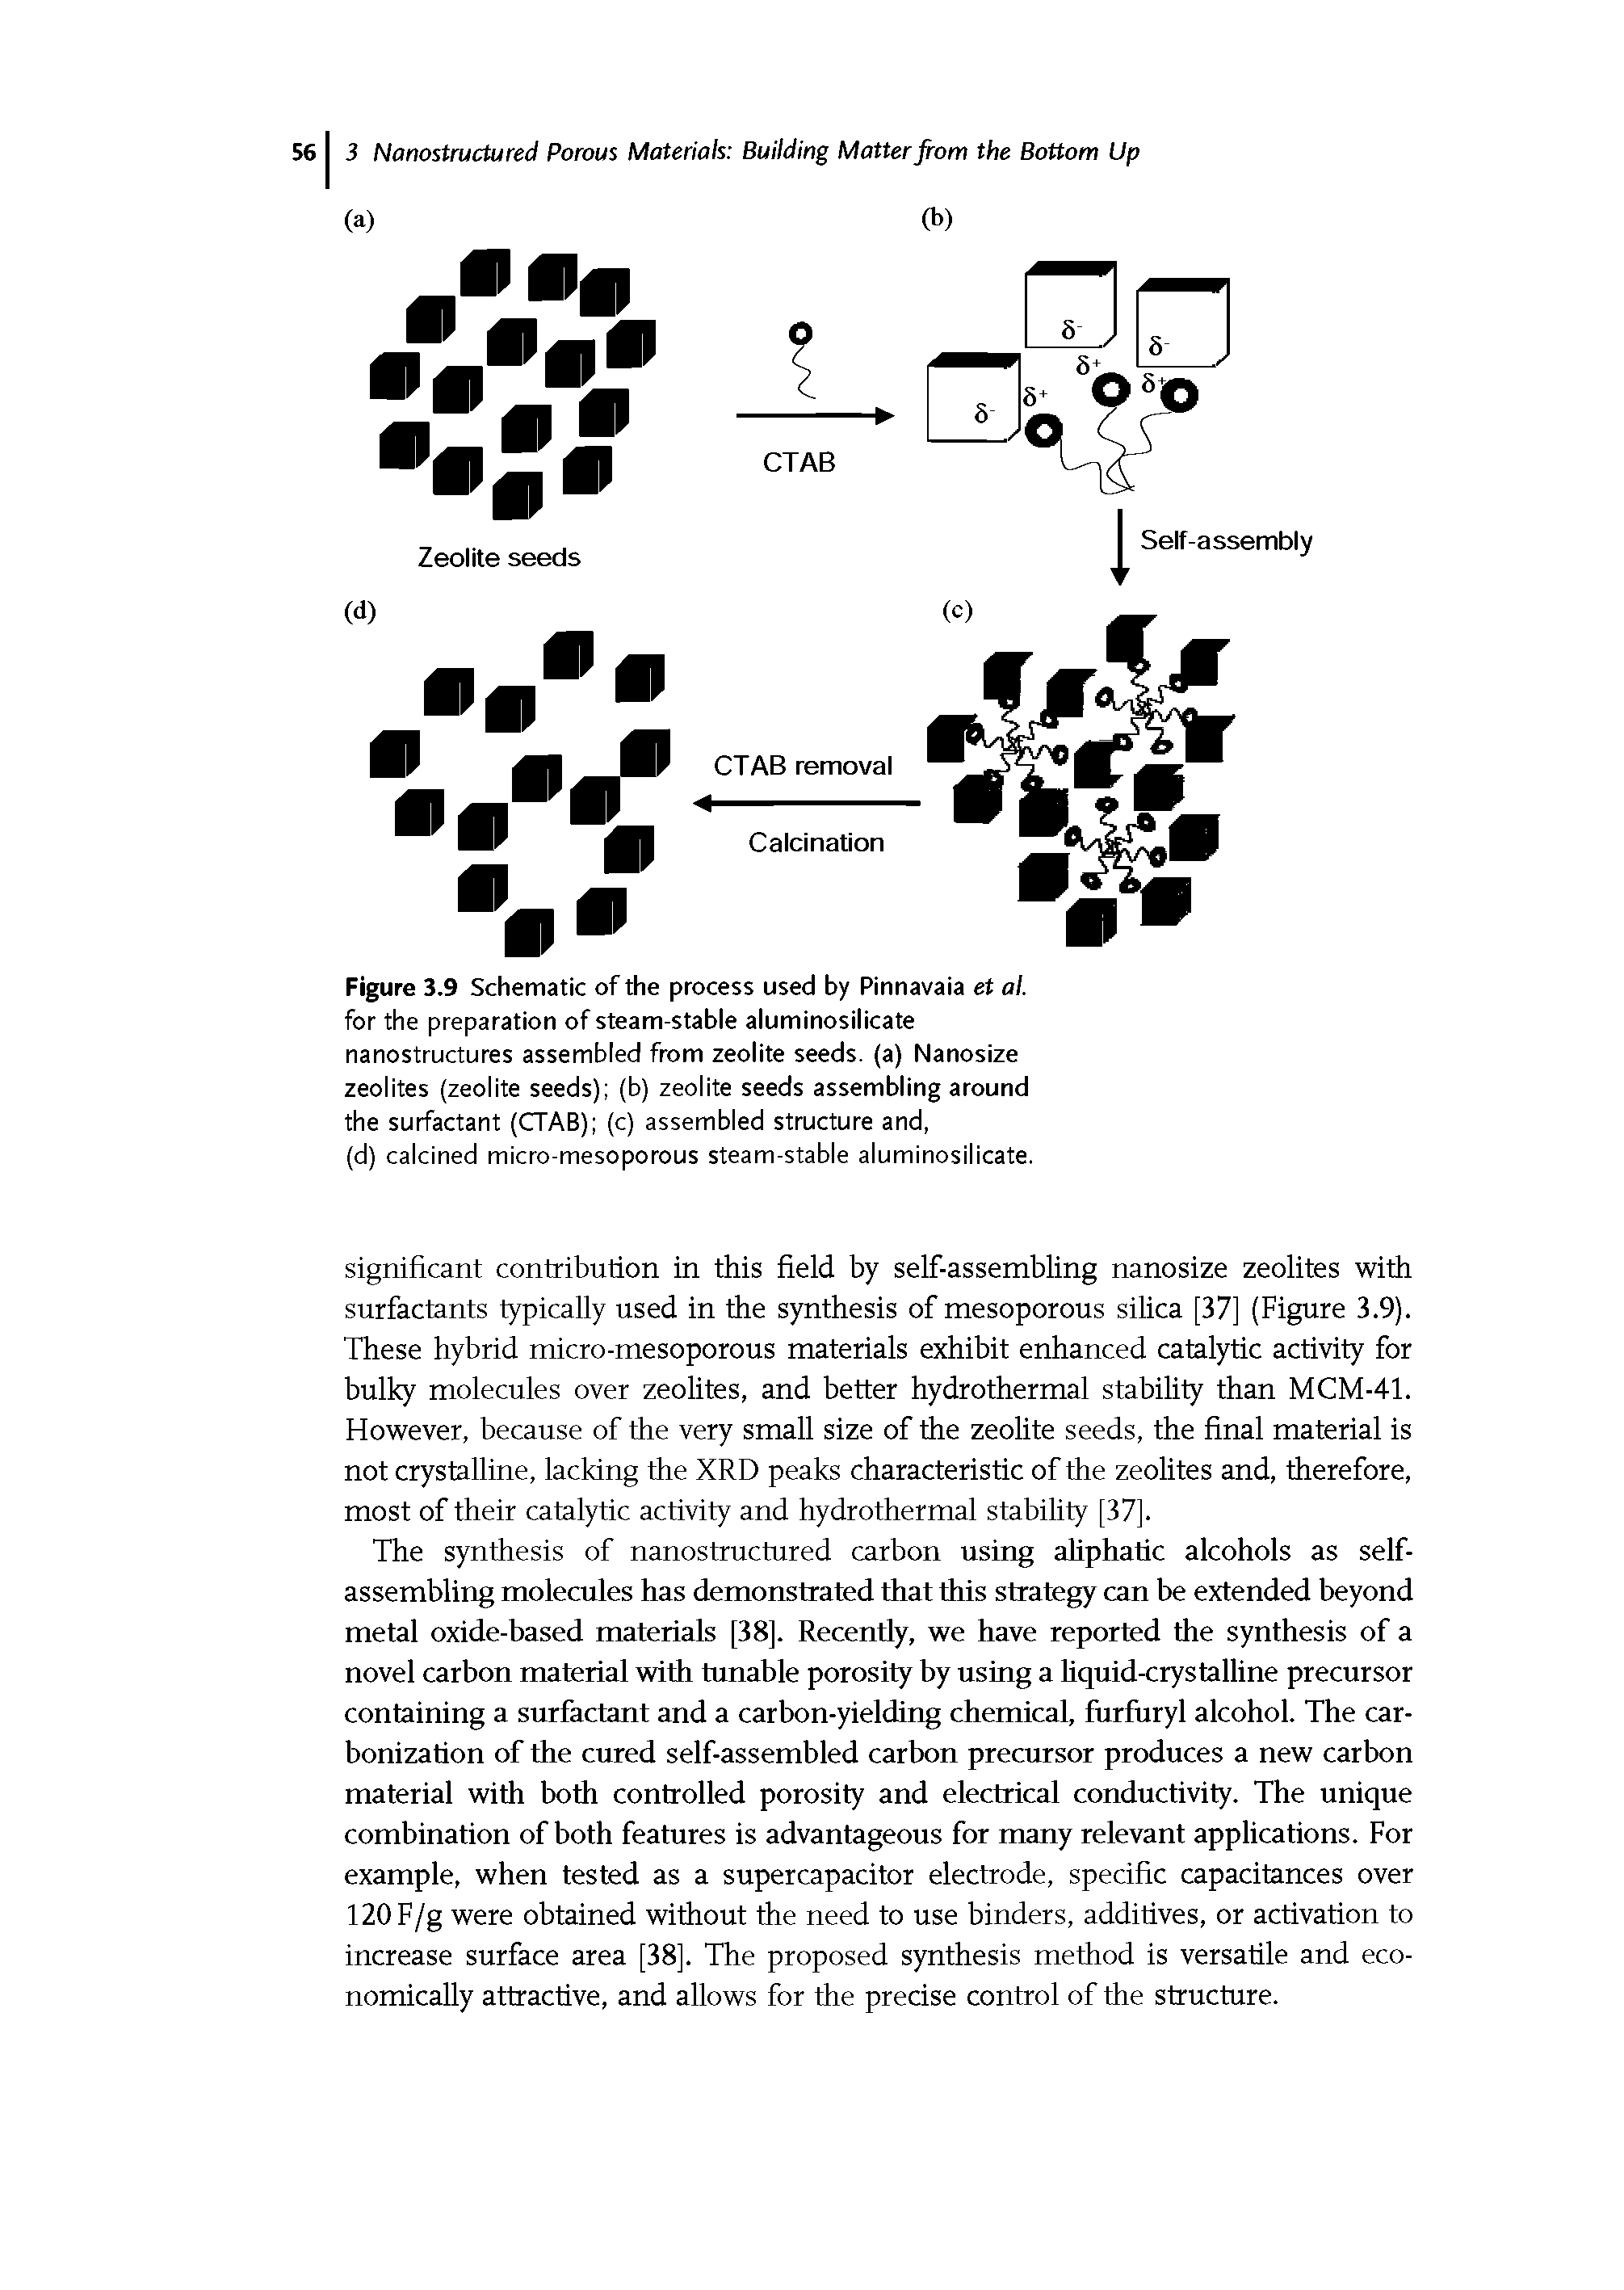 Figure 3.9 Schematic of the process used by Pinnavaia et al. for the preparation of steam-stable aluminosilicate nanostructures assembled from zeolite seeds, (a) Nanosize zeolites (zeolite seeds) (b) zeolite seeds assembling around the surfactant (CTAB) (c) assembled structure and,...